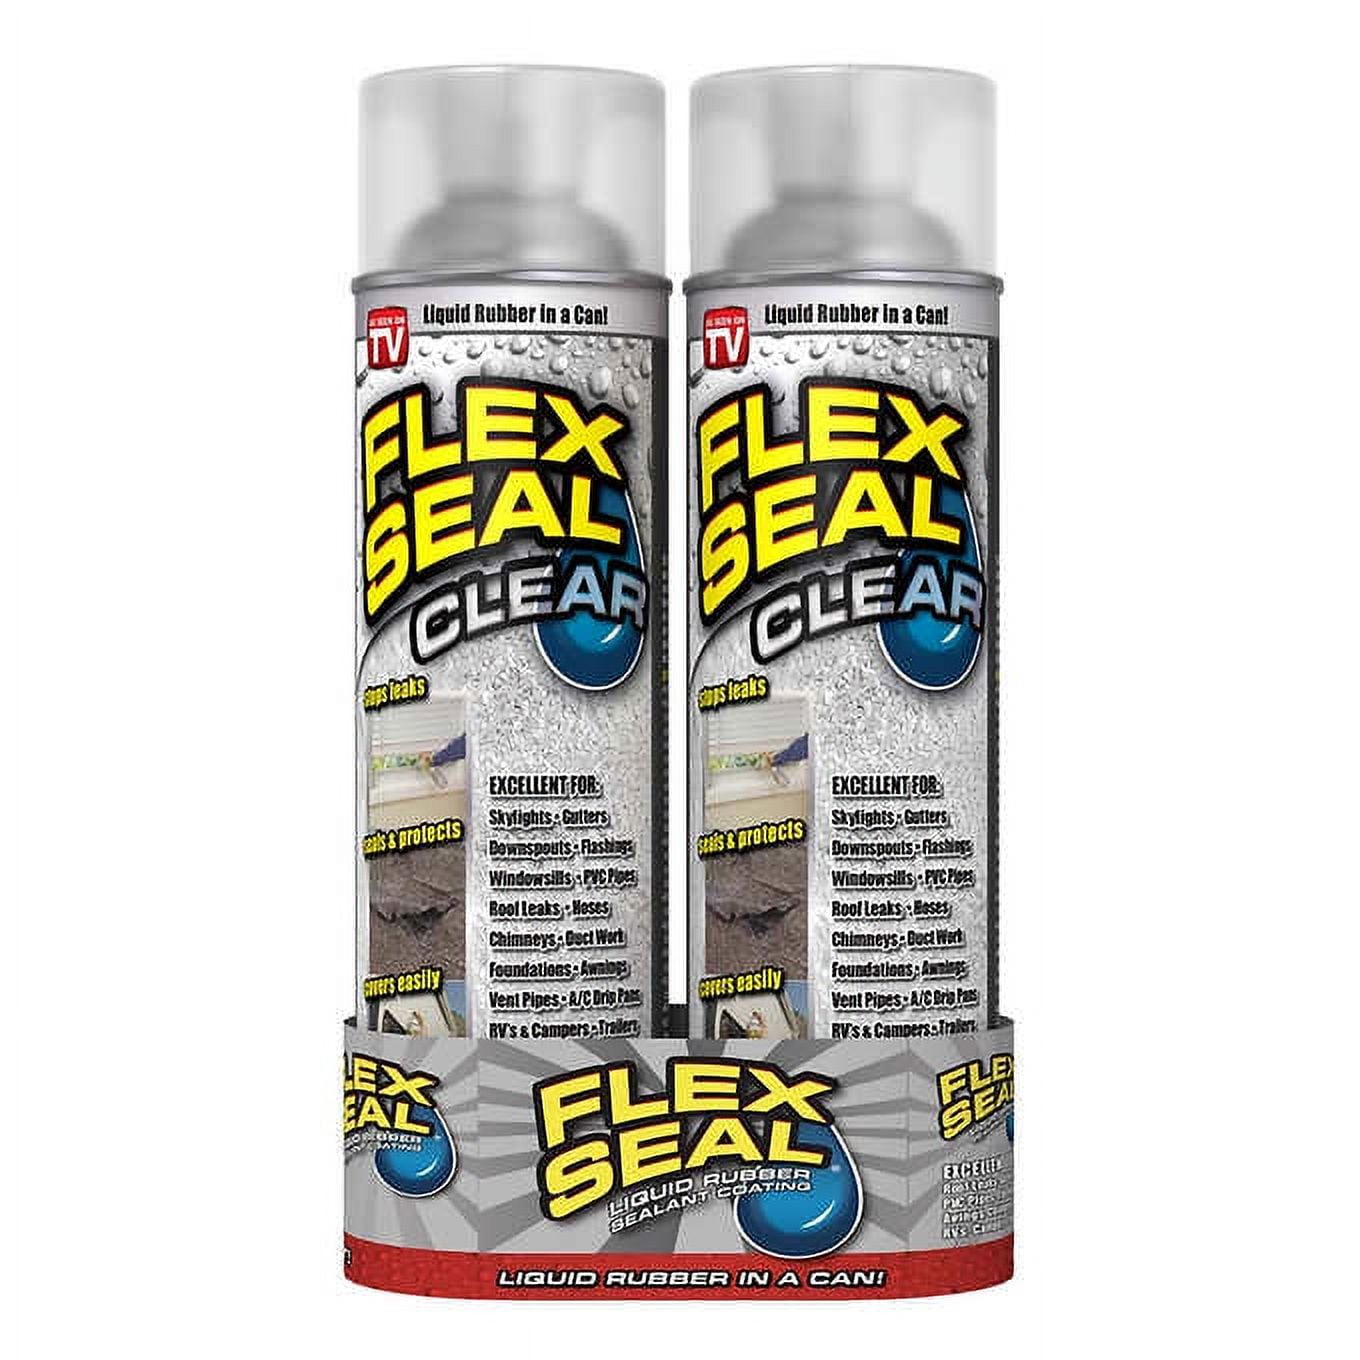 Spray your pick and pluck foam with flex seal to keep it from tearing apart  so fast. : r/longrange